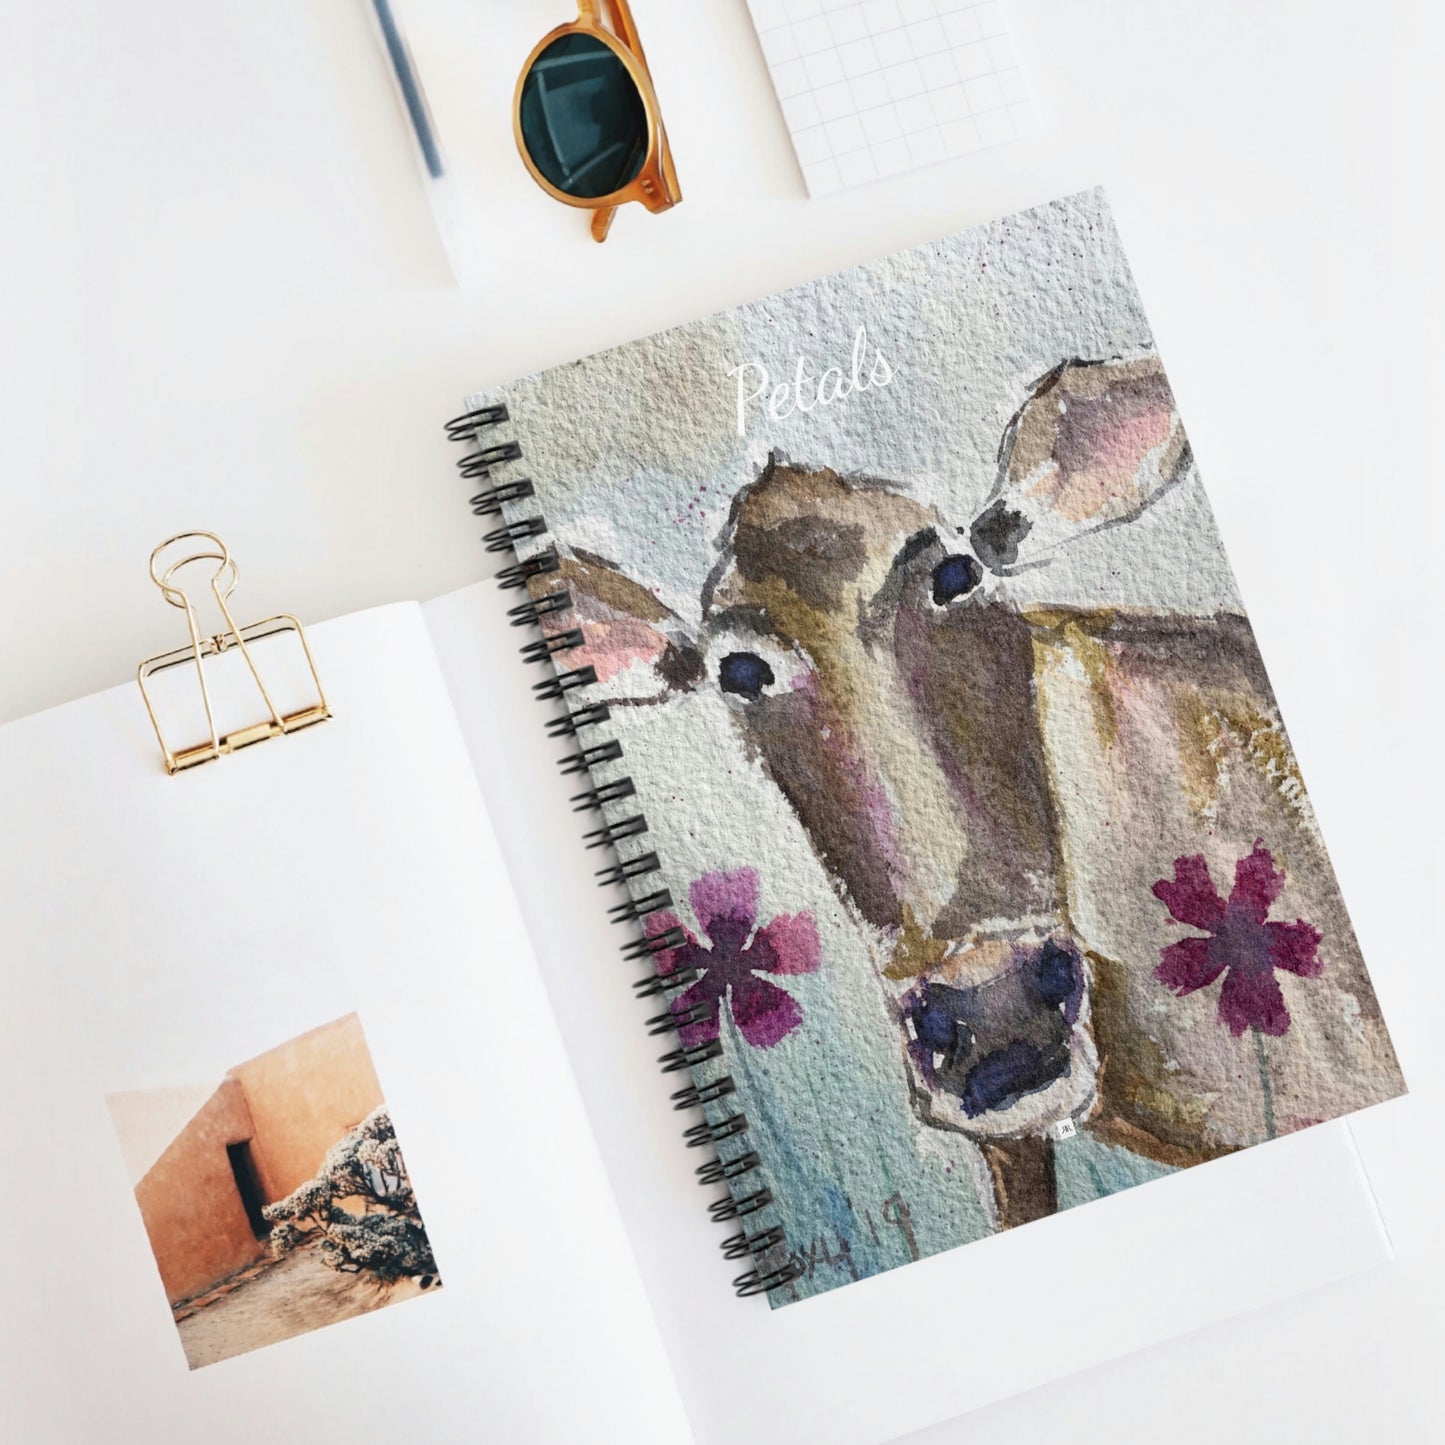 Petals Cow - Whimsical Cow Painting Spiral Notebook